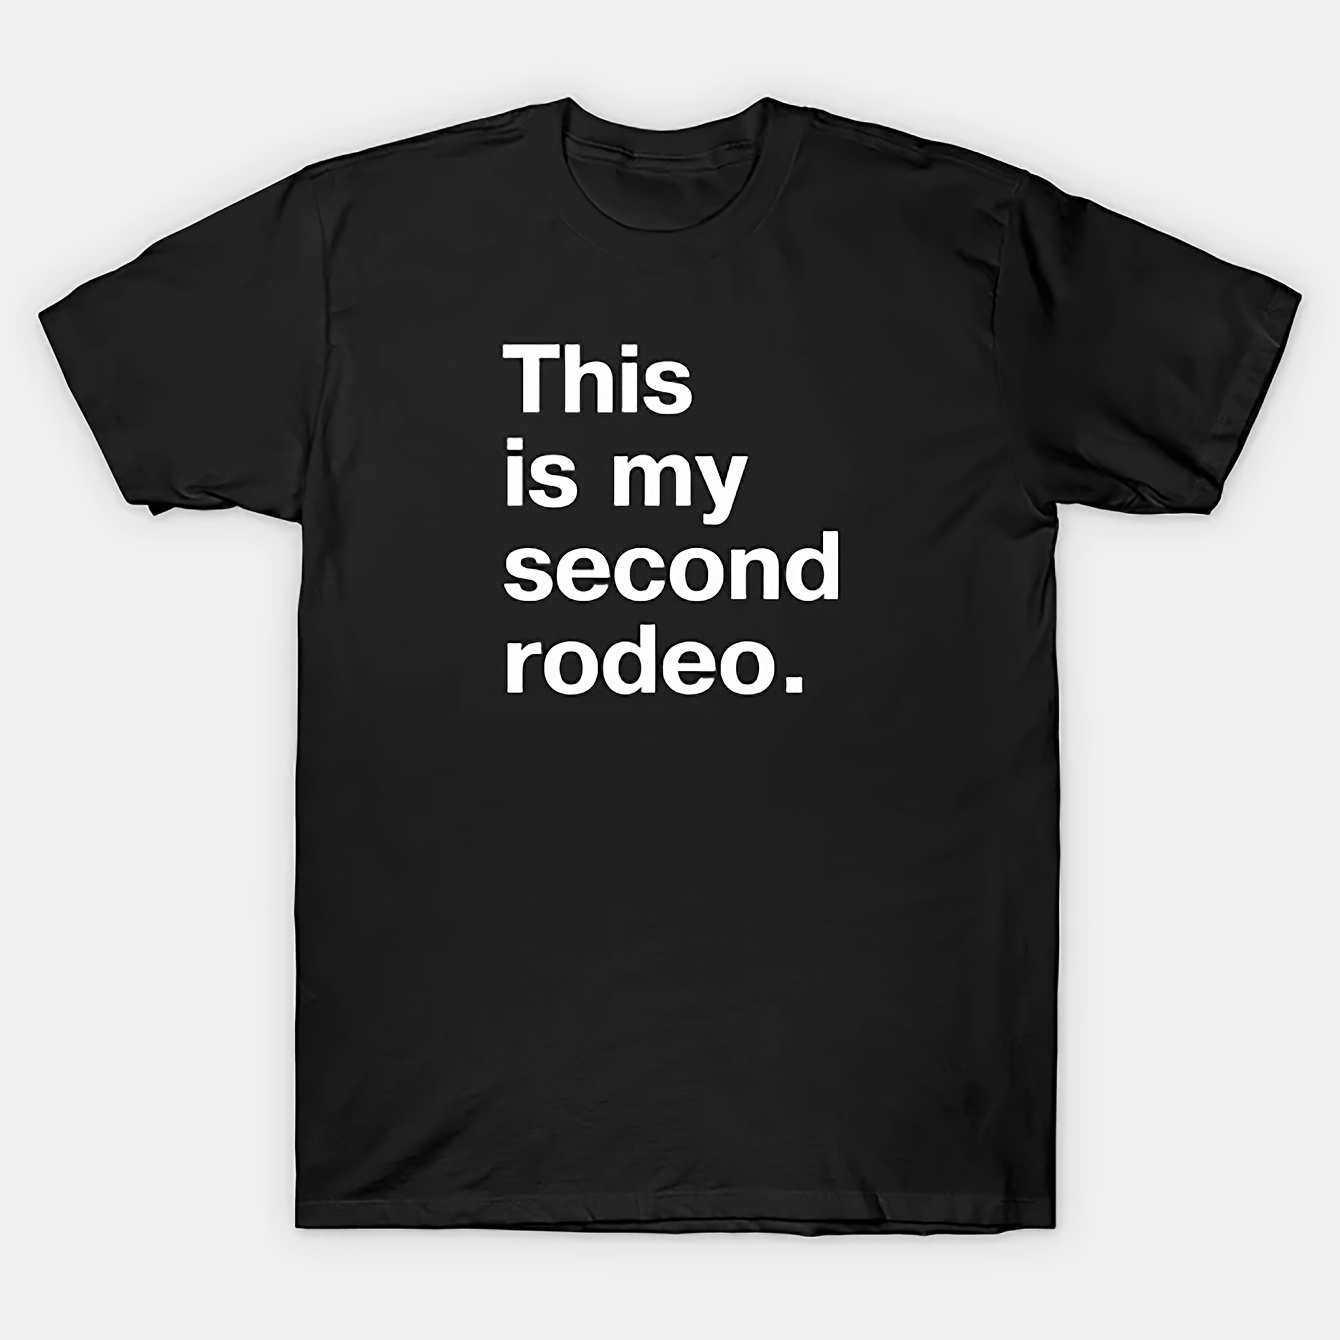 

this Is My Second Rodeo." Print Tee Shirt, Tees For Men, Casual Short Sleeve T-shirt For Summer